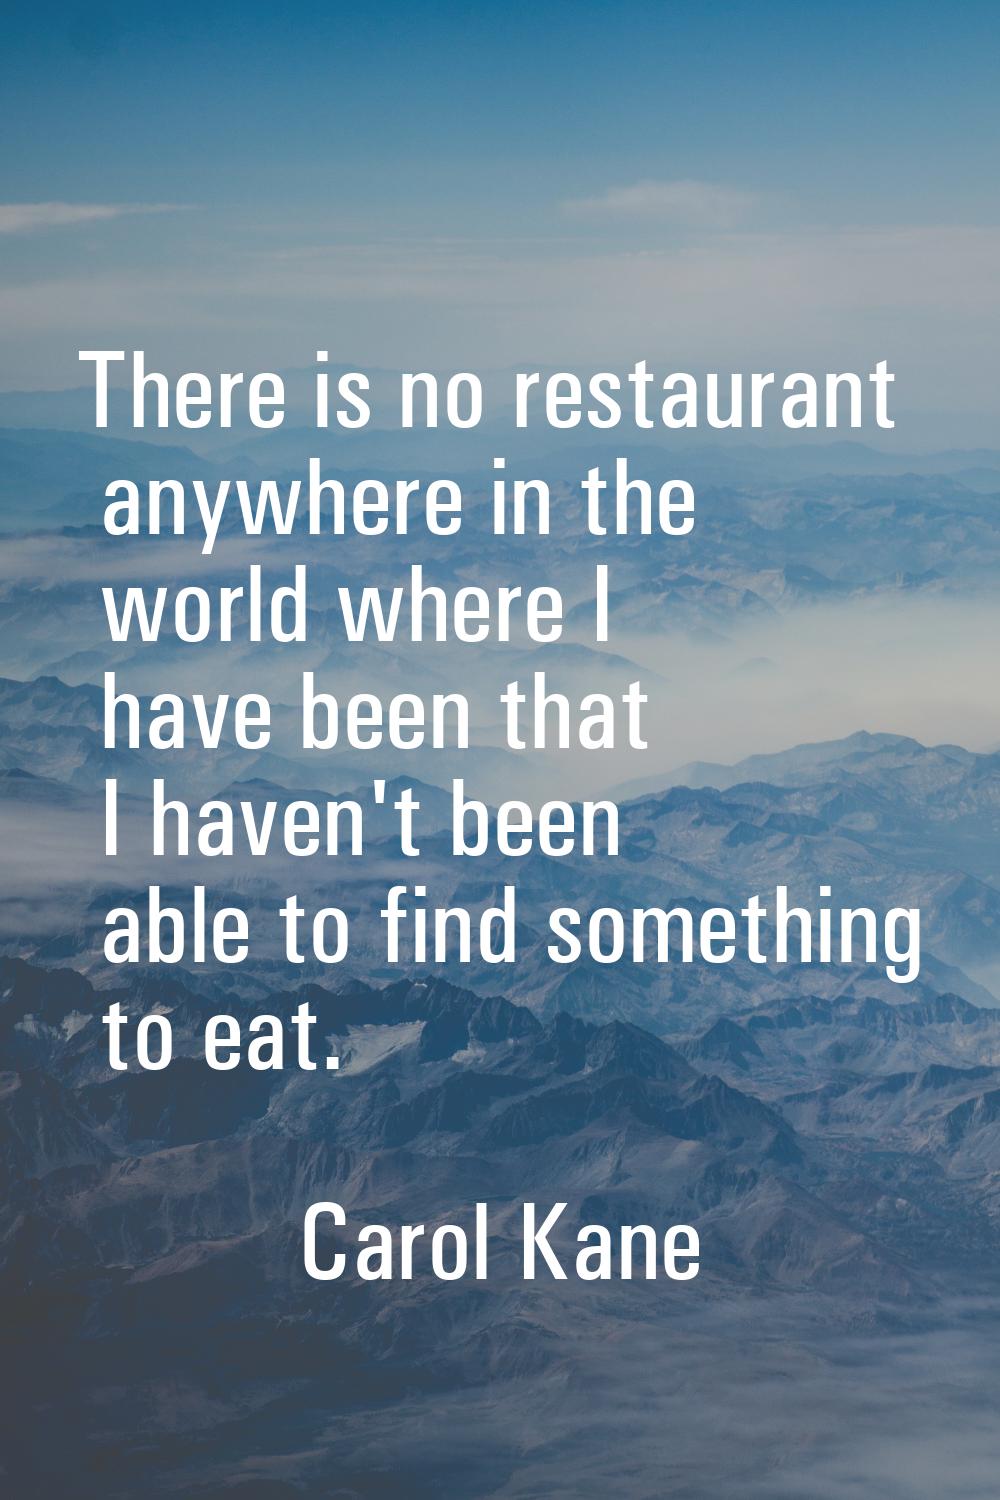 There is no restaurant anywhere in the world where I have been that I haven't been able to find som